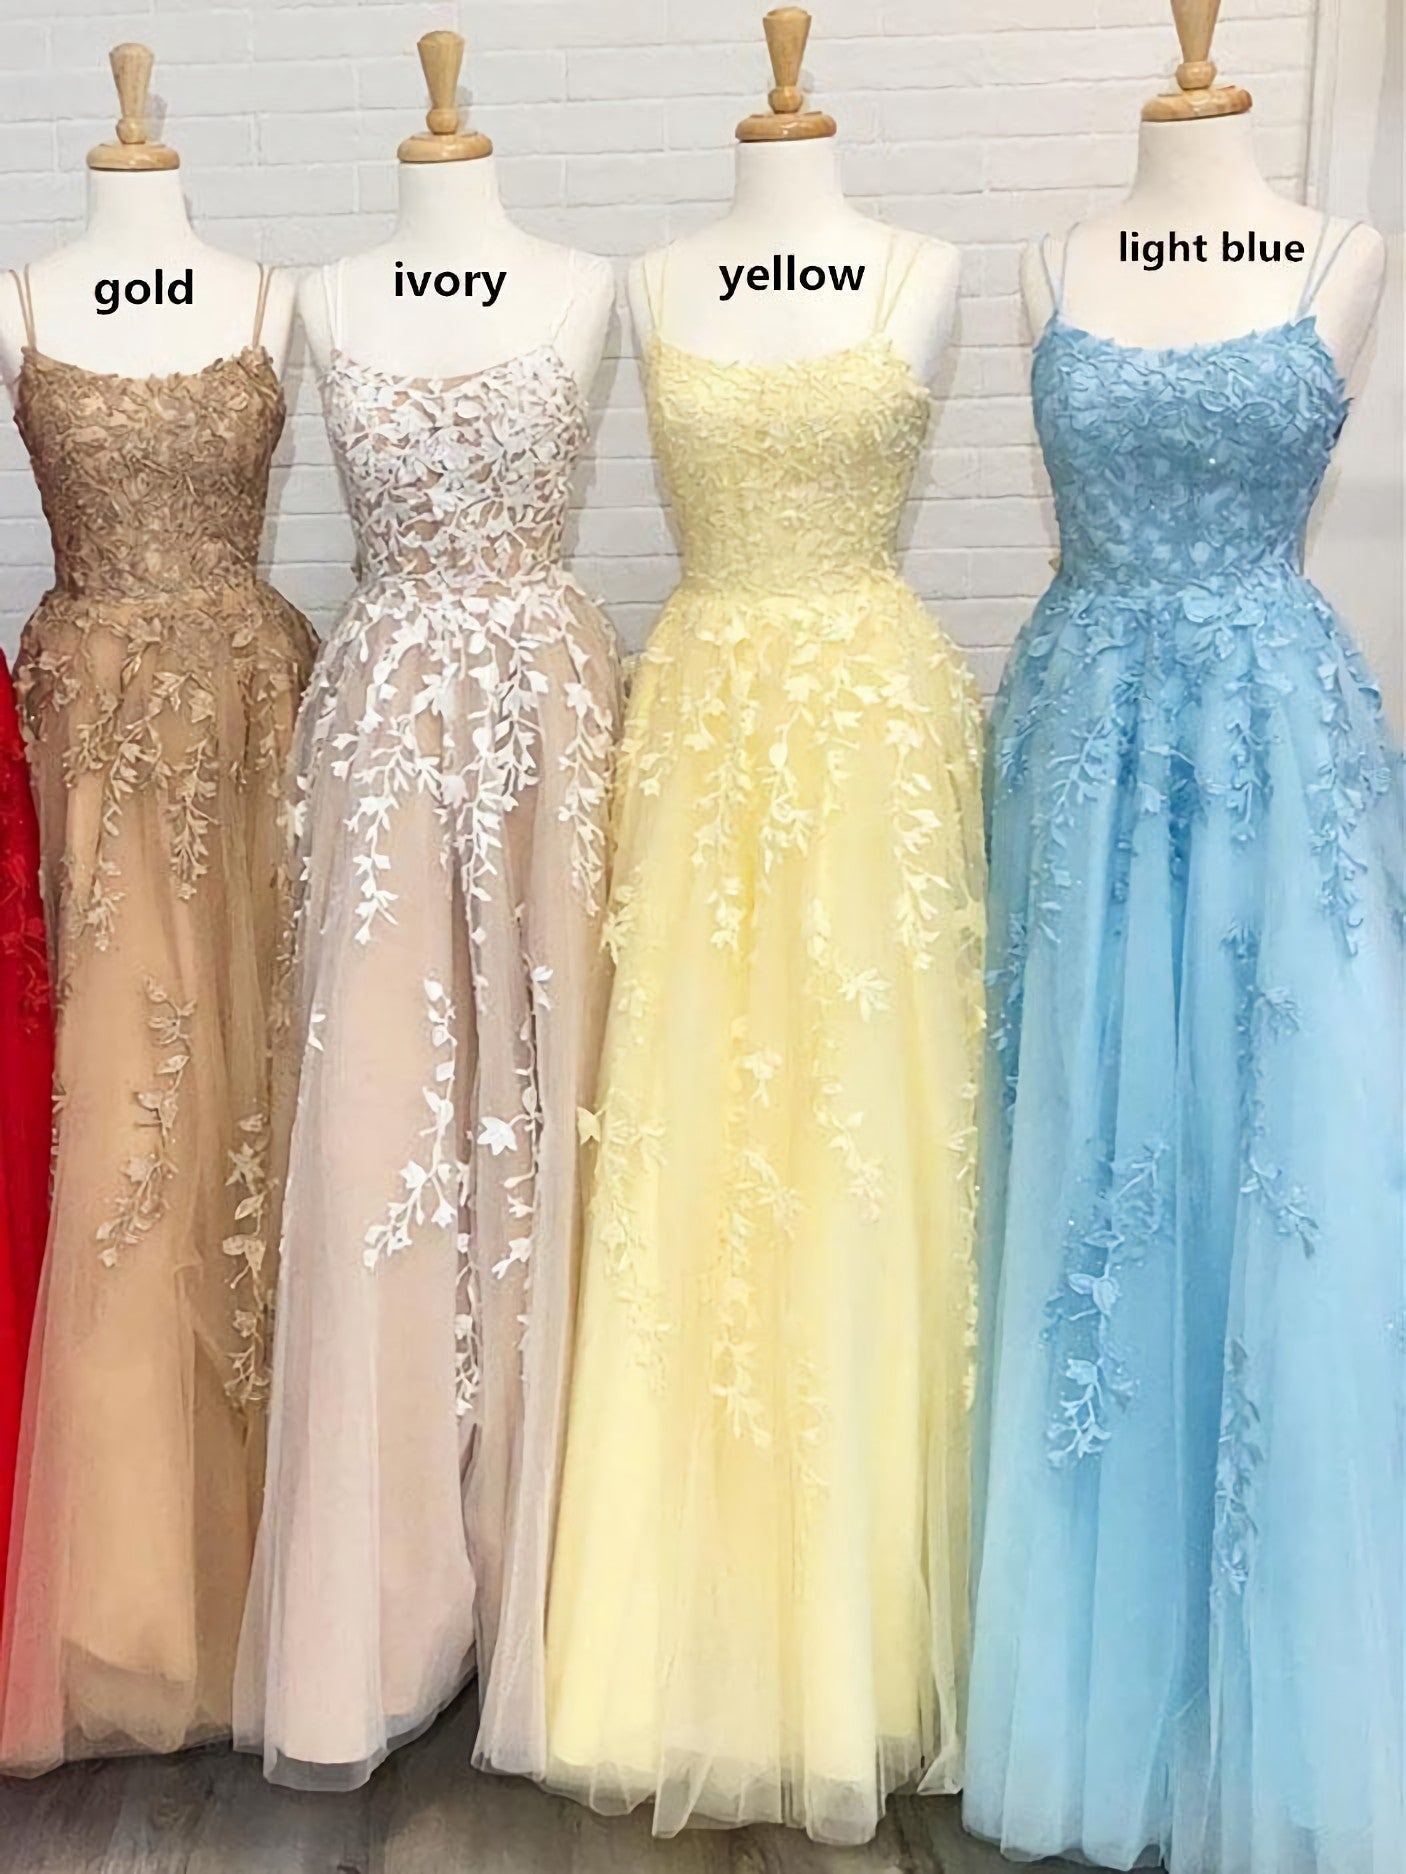 Short White Dress, A Line Tulle Yellow Spaghetti Straps Prom Dresses With Appliques Party Dresses